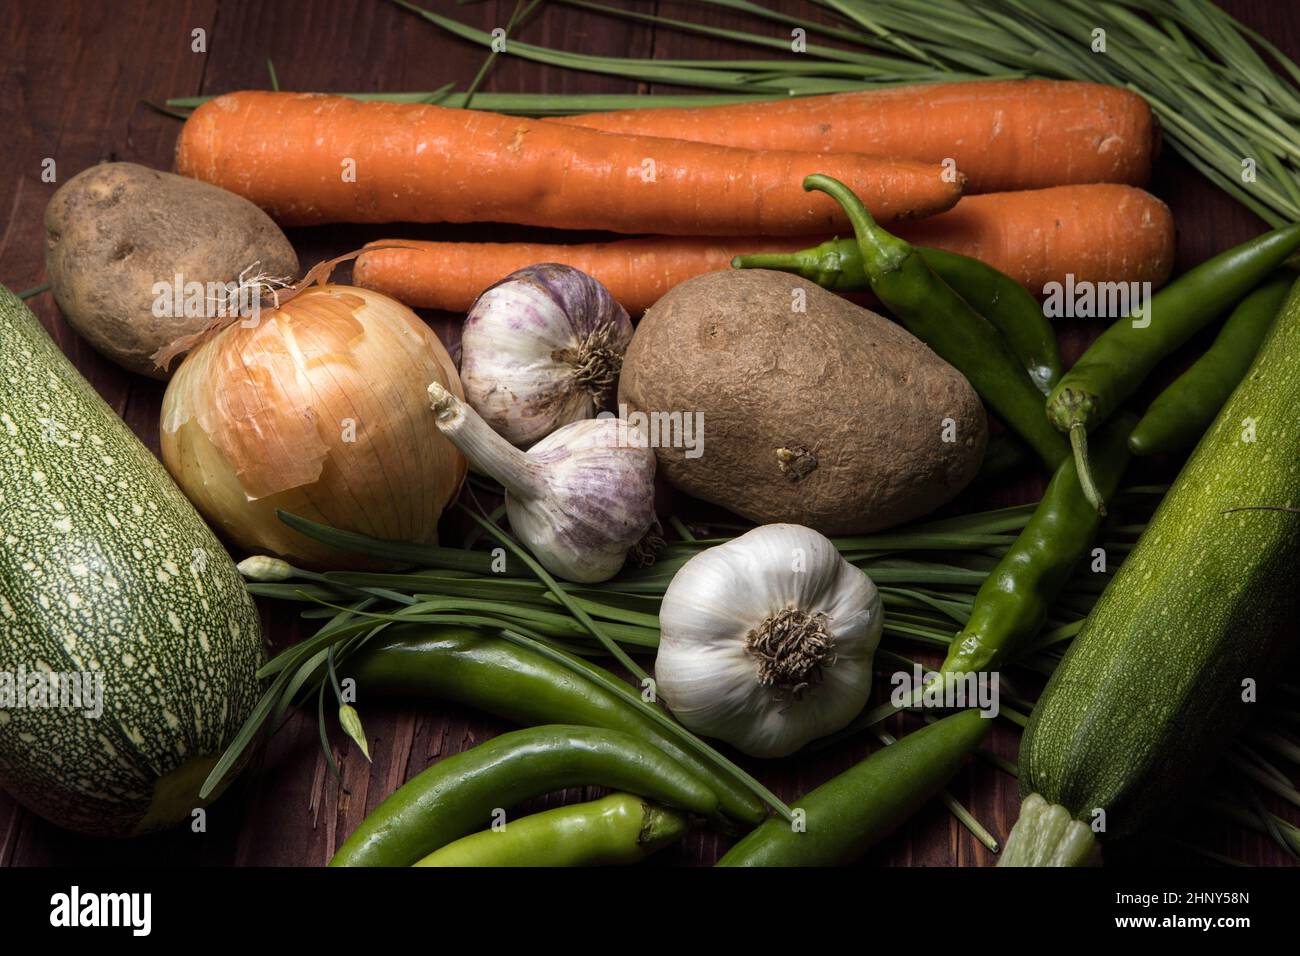 A close up of a bunch of assorted vegetables such as garlic, carrots, chives, onions, potatoes, and peppers. Stock Photo